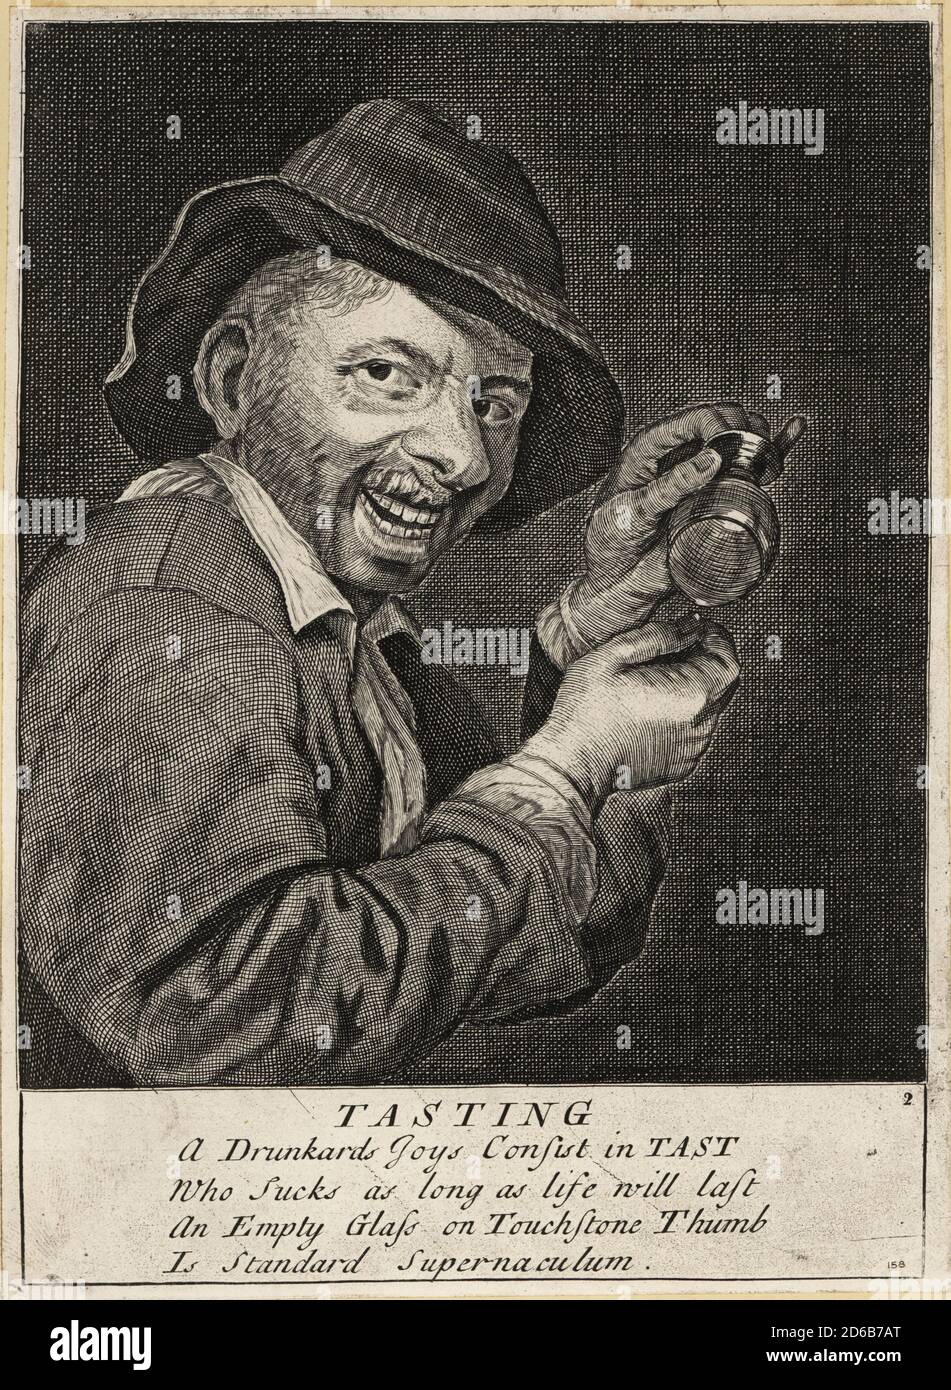 17th century English drunk playing a drinking game. He must drink more if the last drop from an empty glass covers the edge of his fingernail. Tasting. A drunkard’s joys consist in tast, Who sucks as long as life will last. An empty glass on touchstone thumb, Is standard supernaculum. Possibly from an original print in The merry conceited five senses, Robert Walton, 1661. Copperplate engraving by David Deuchar from A Collection of Etchings after the most Eminent Masters of the Dutch and Flemish Schools, Edinburgh, 1803. Stock Photo